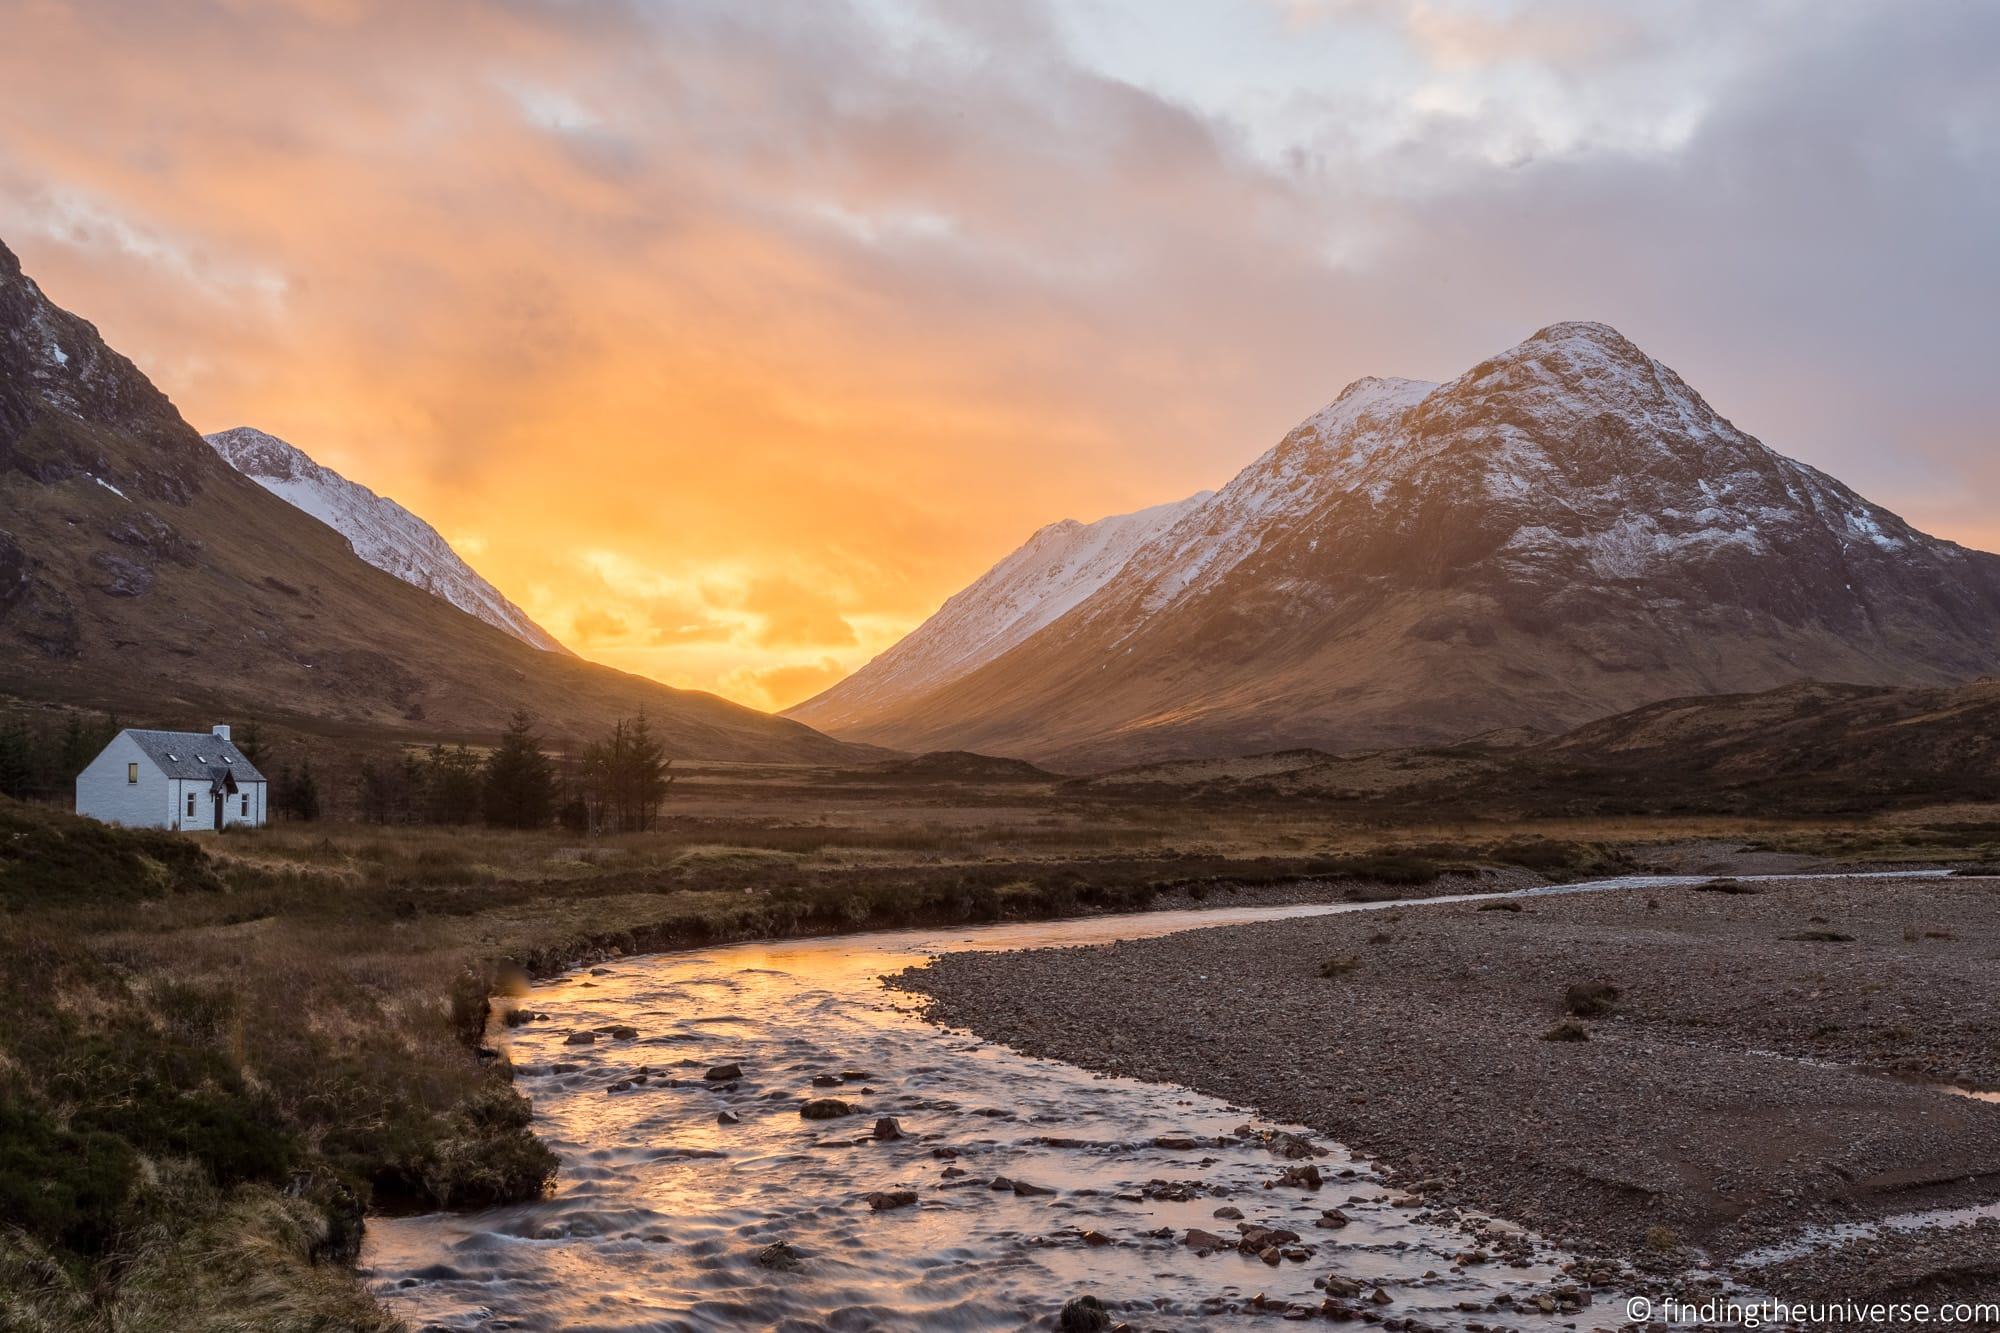 Glen Coe Scotland - A Complete Guide to Visiting